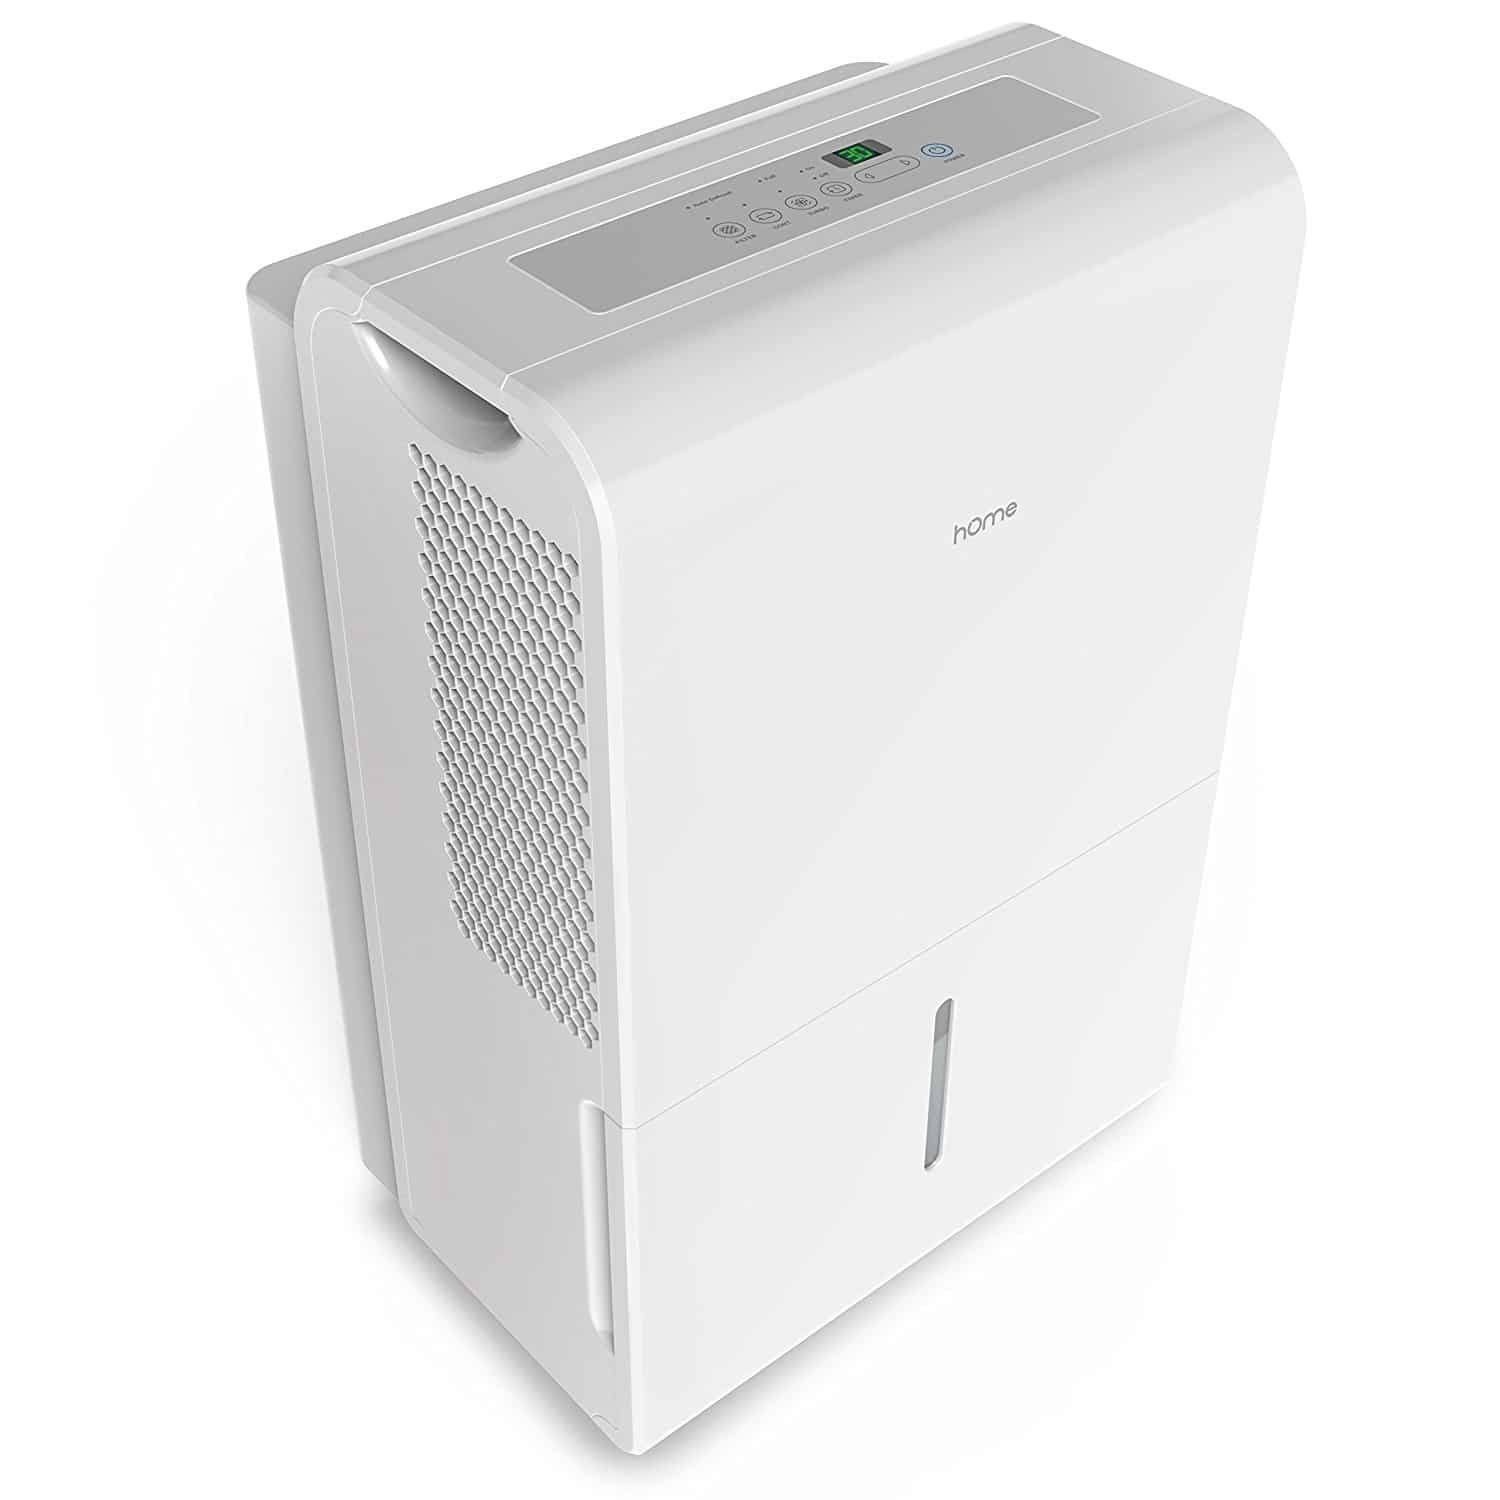 best dehumidifier for basement: If you're looking for the best of the best, go for it!